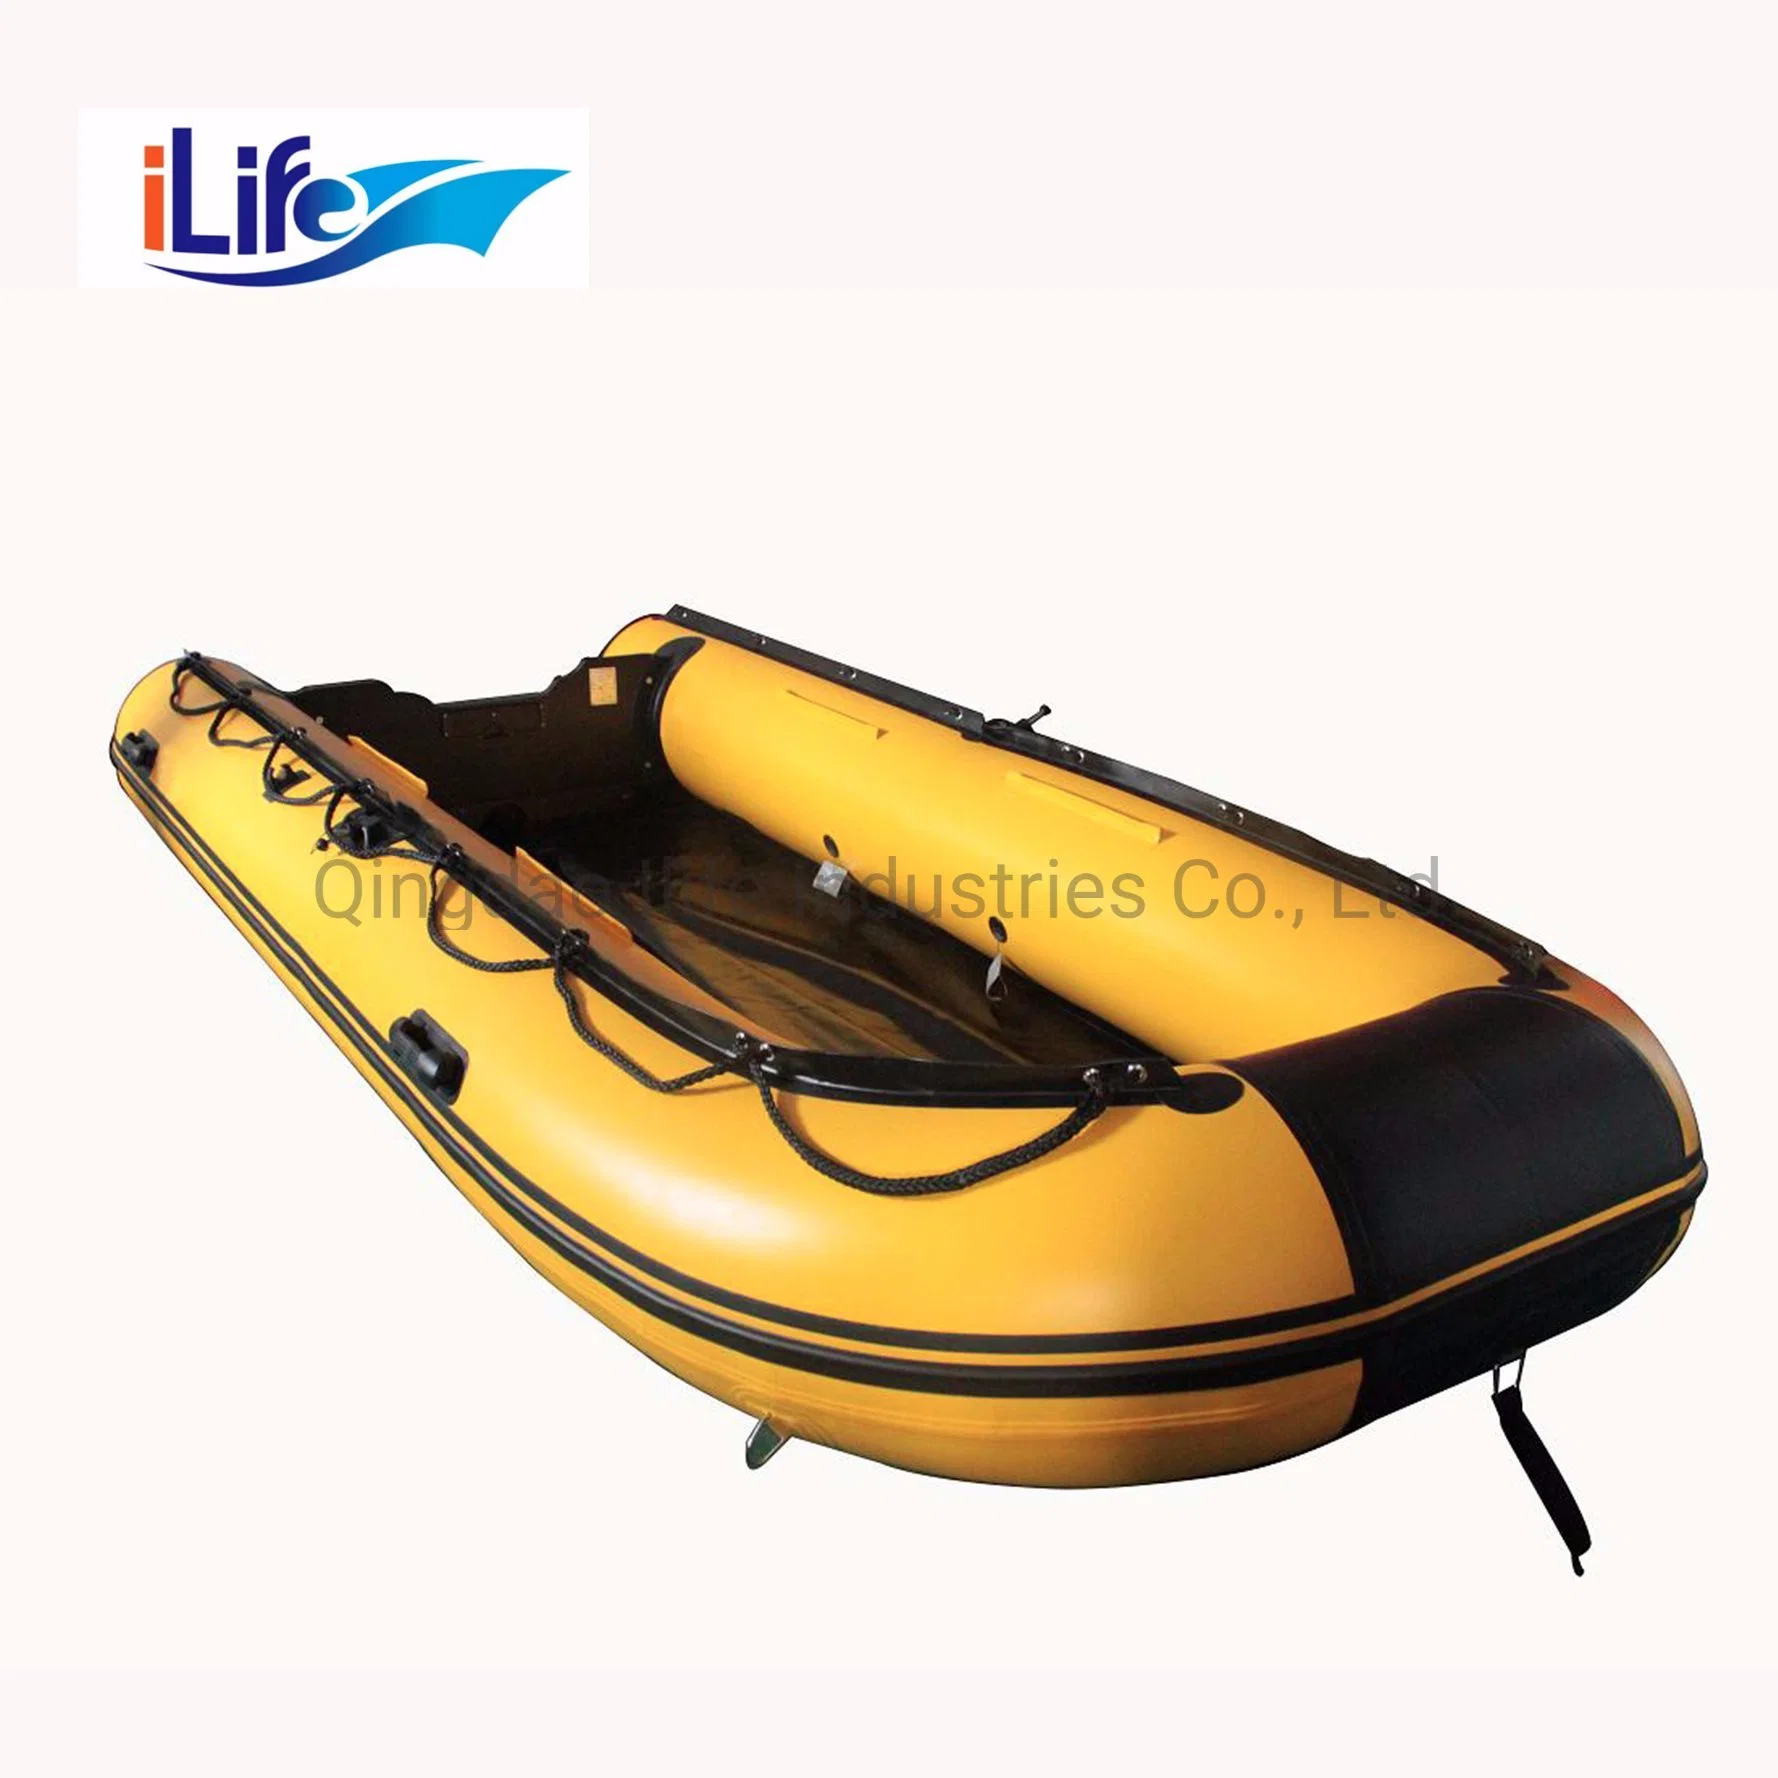 Ilife 4.3m Yellow Offshore PVC/Hypalon Inflatable Rescue Fishing Rubber Boat with Aluminum/Drop Stitch Air/Plywood Floor for Rescue